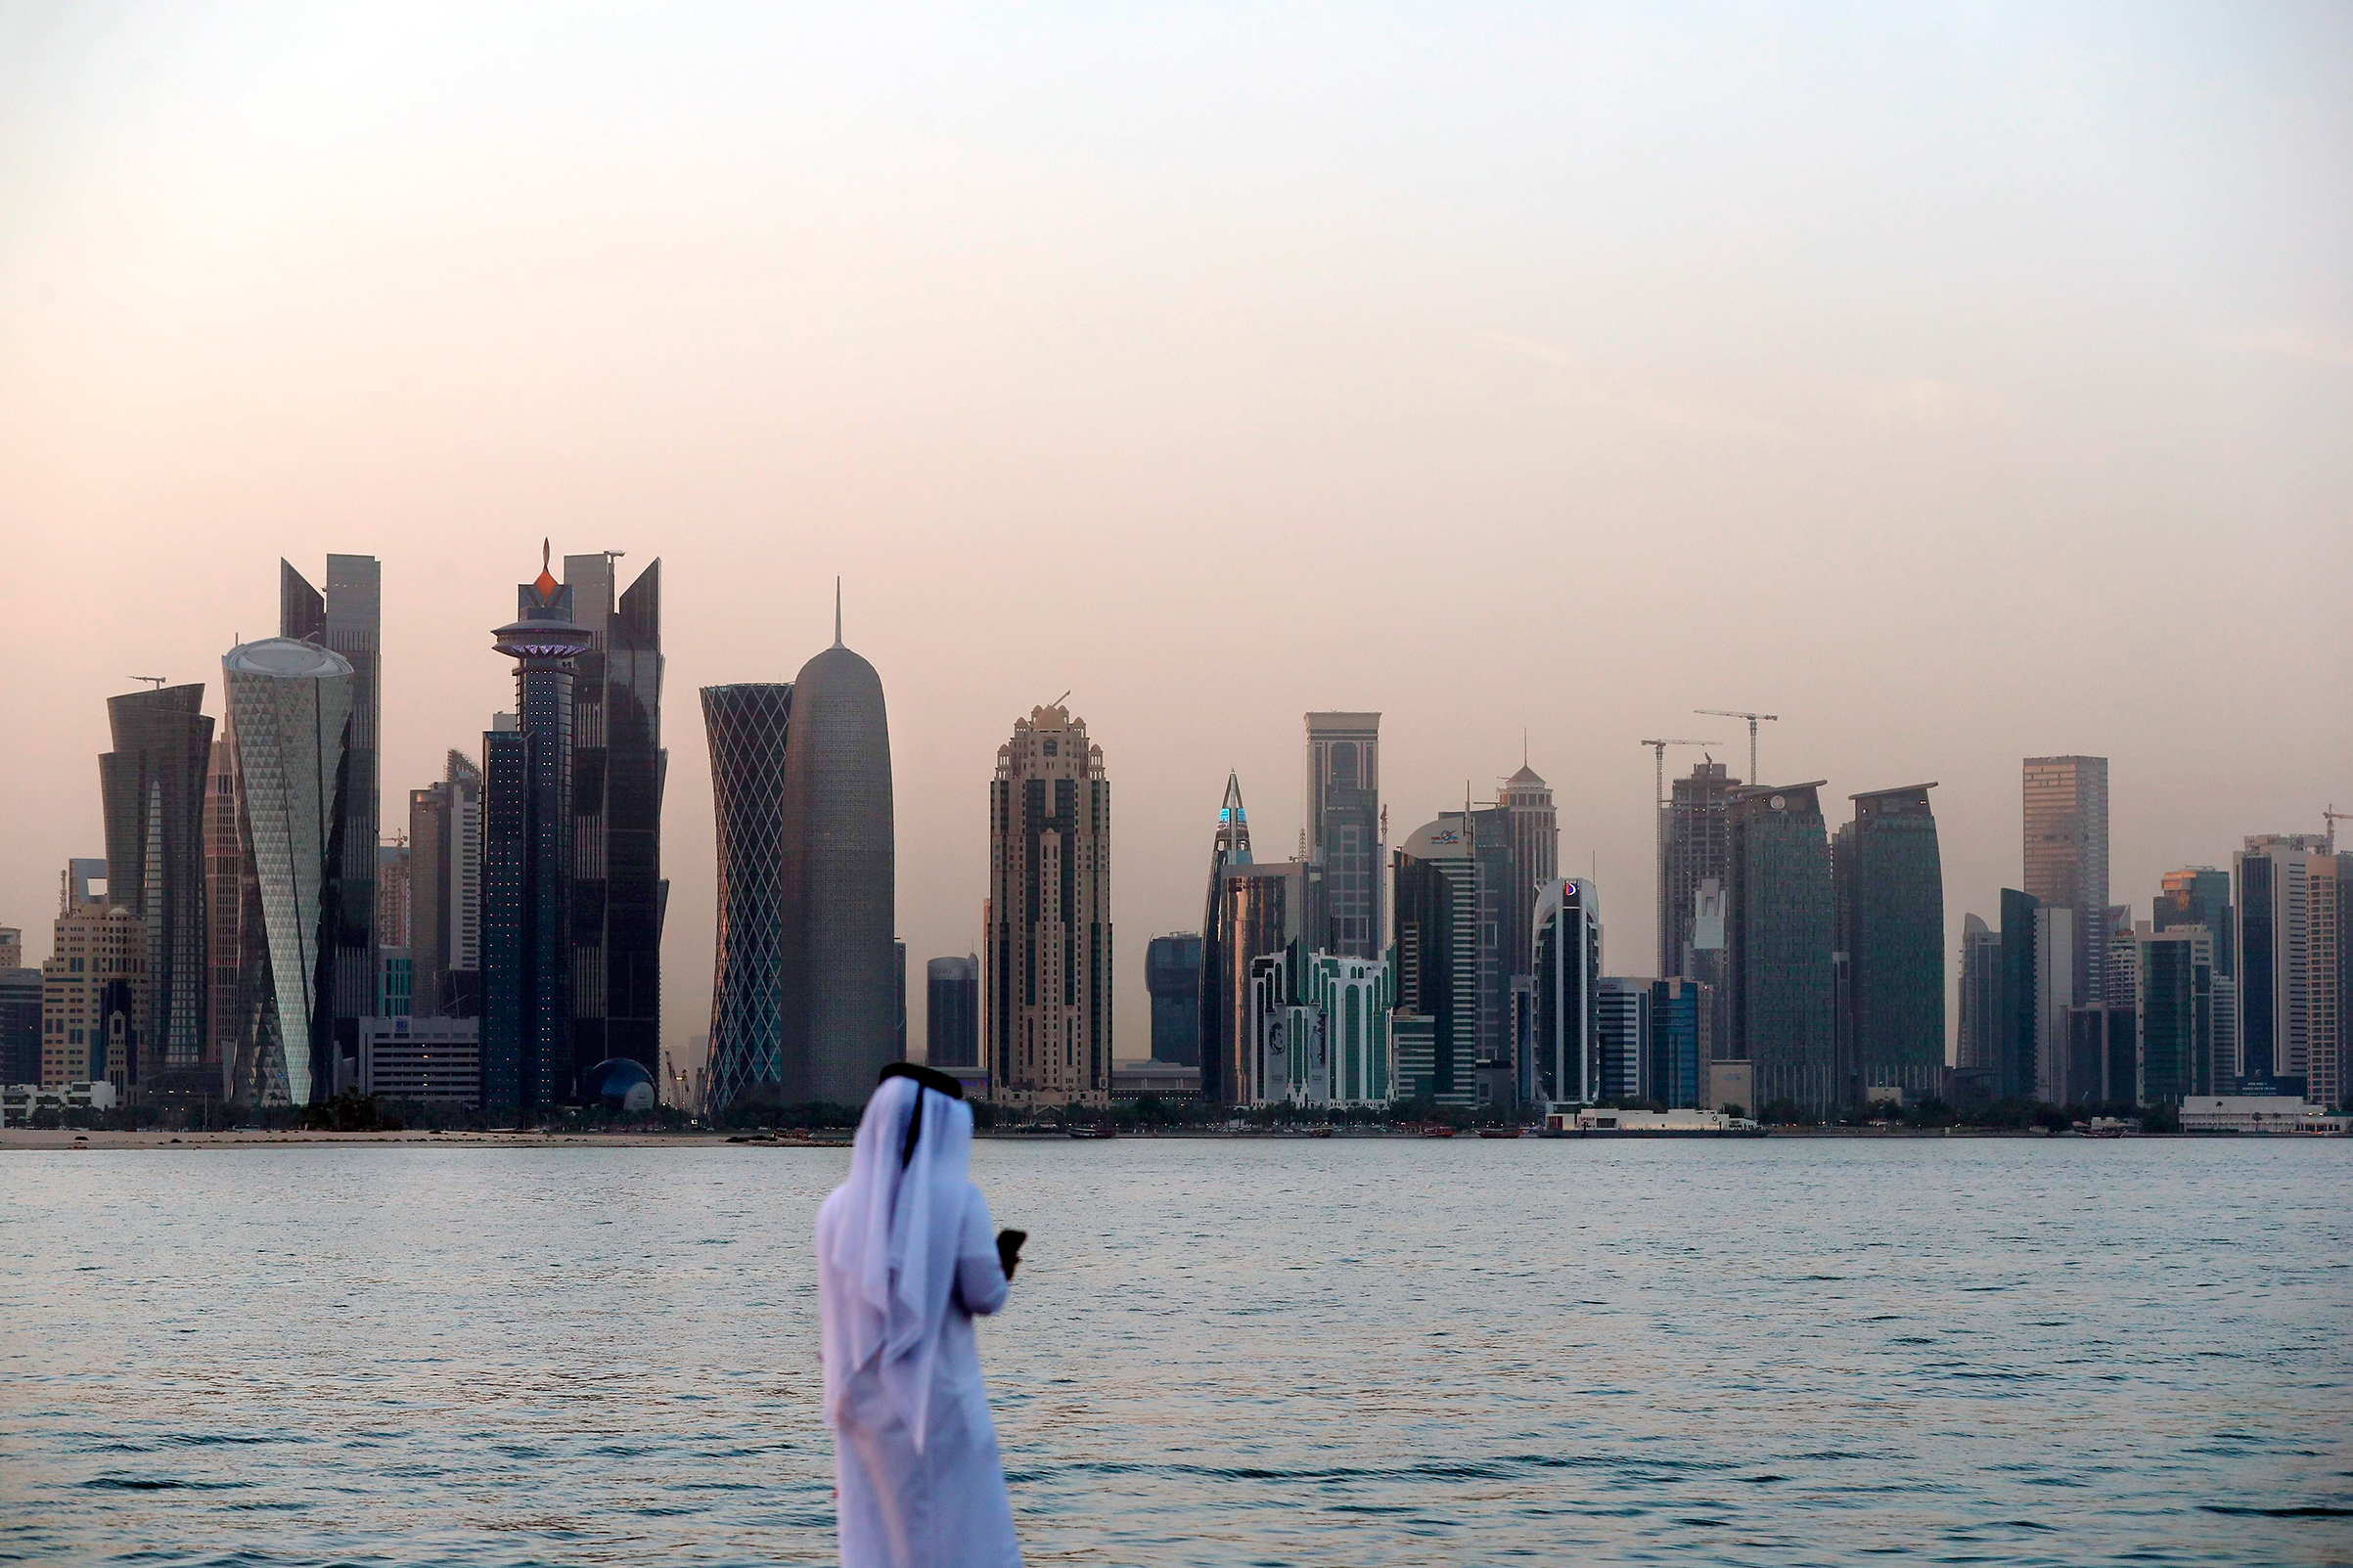 Life in Doha is relatively unchanged after weeks under a blockade (AFP/Getty Images)